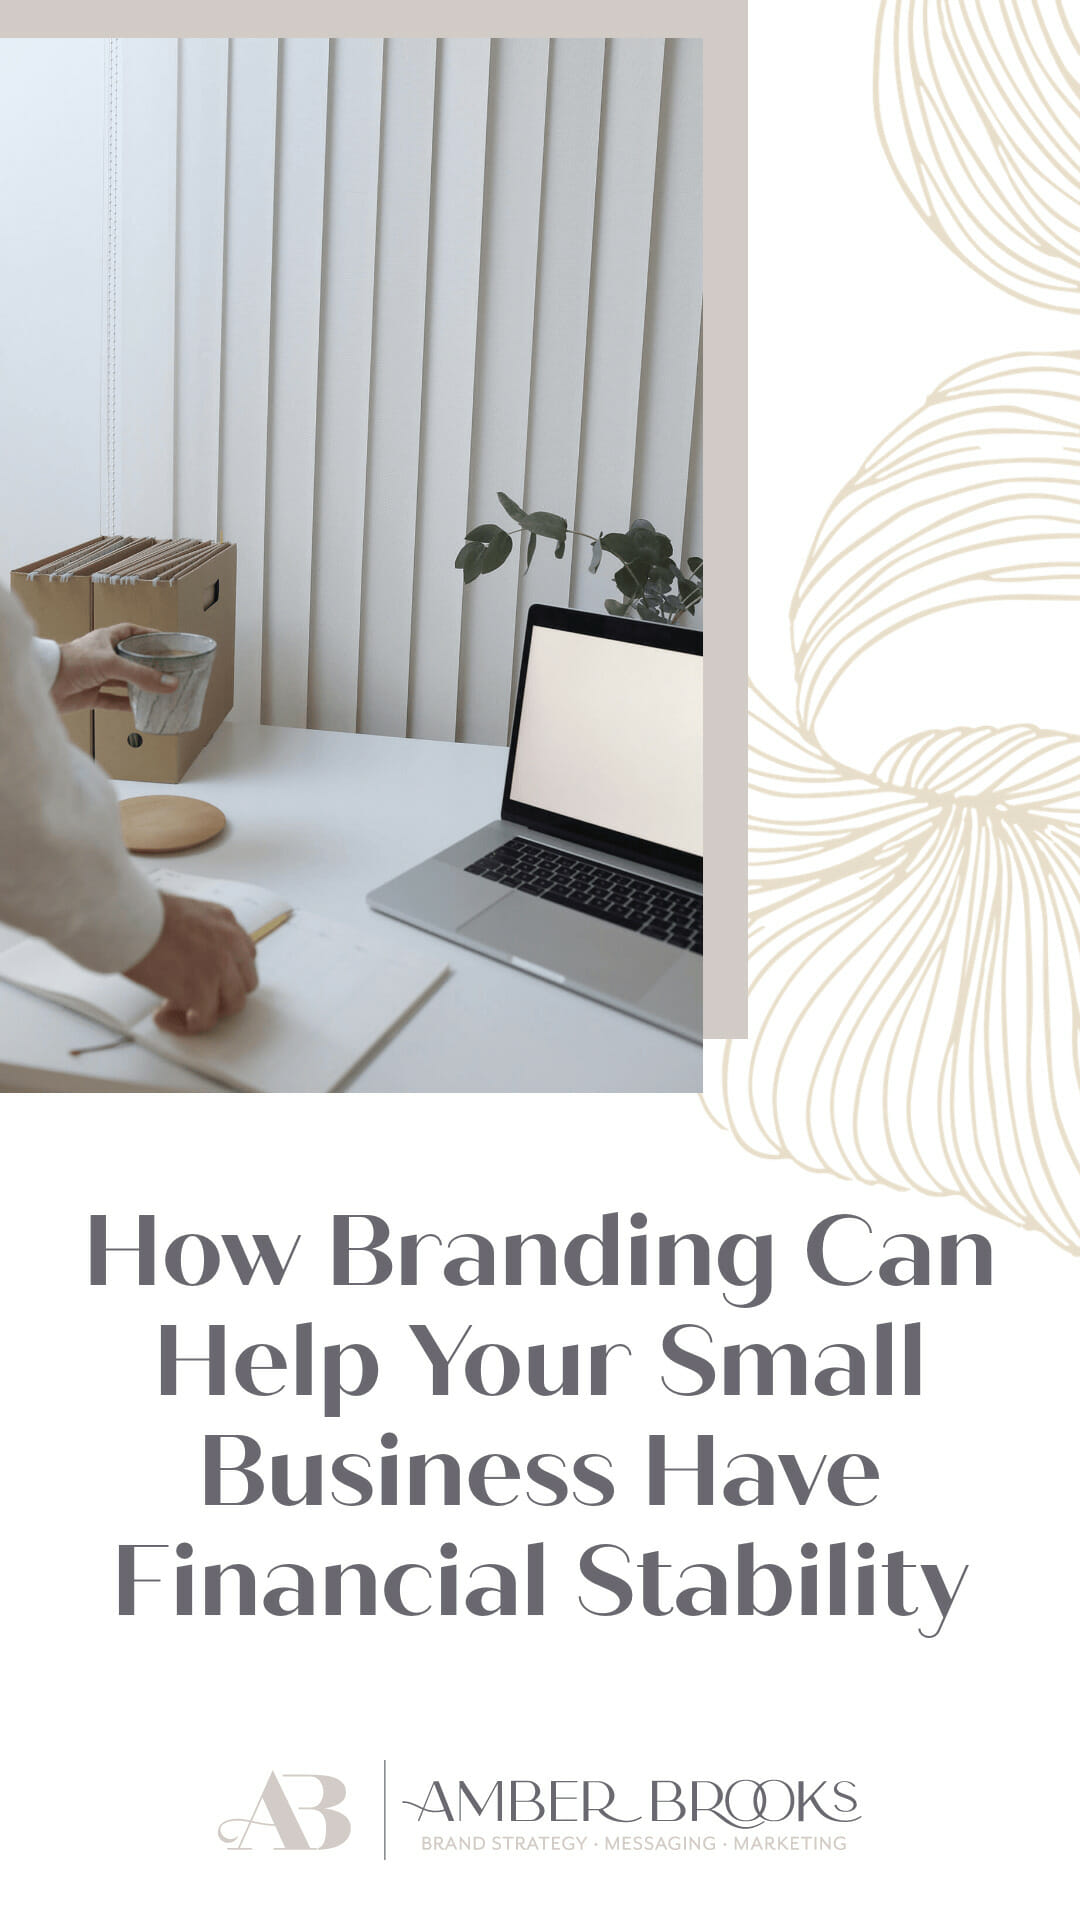 How Branding Can Help Your Small Business Have Financial Stability